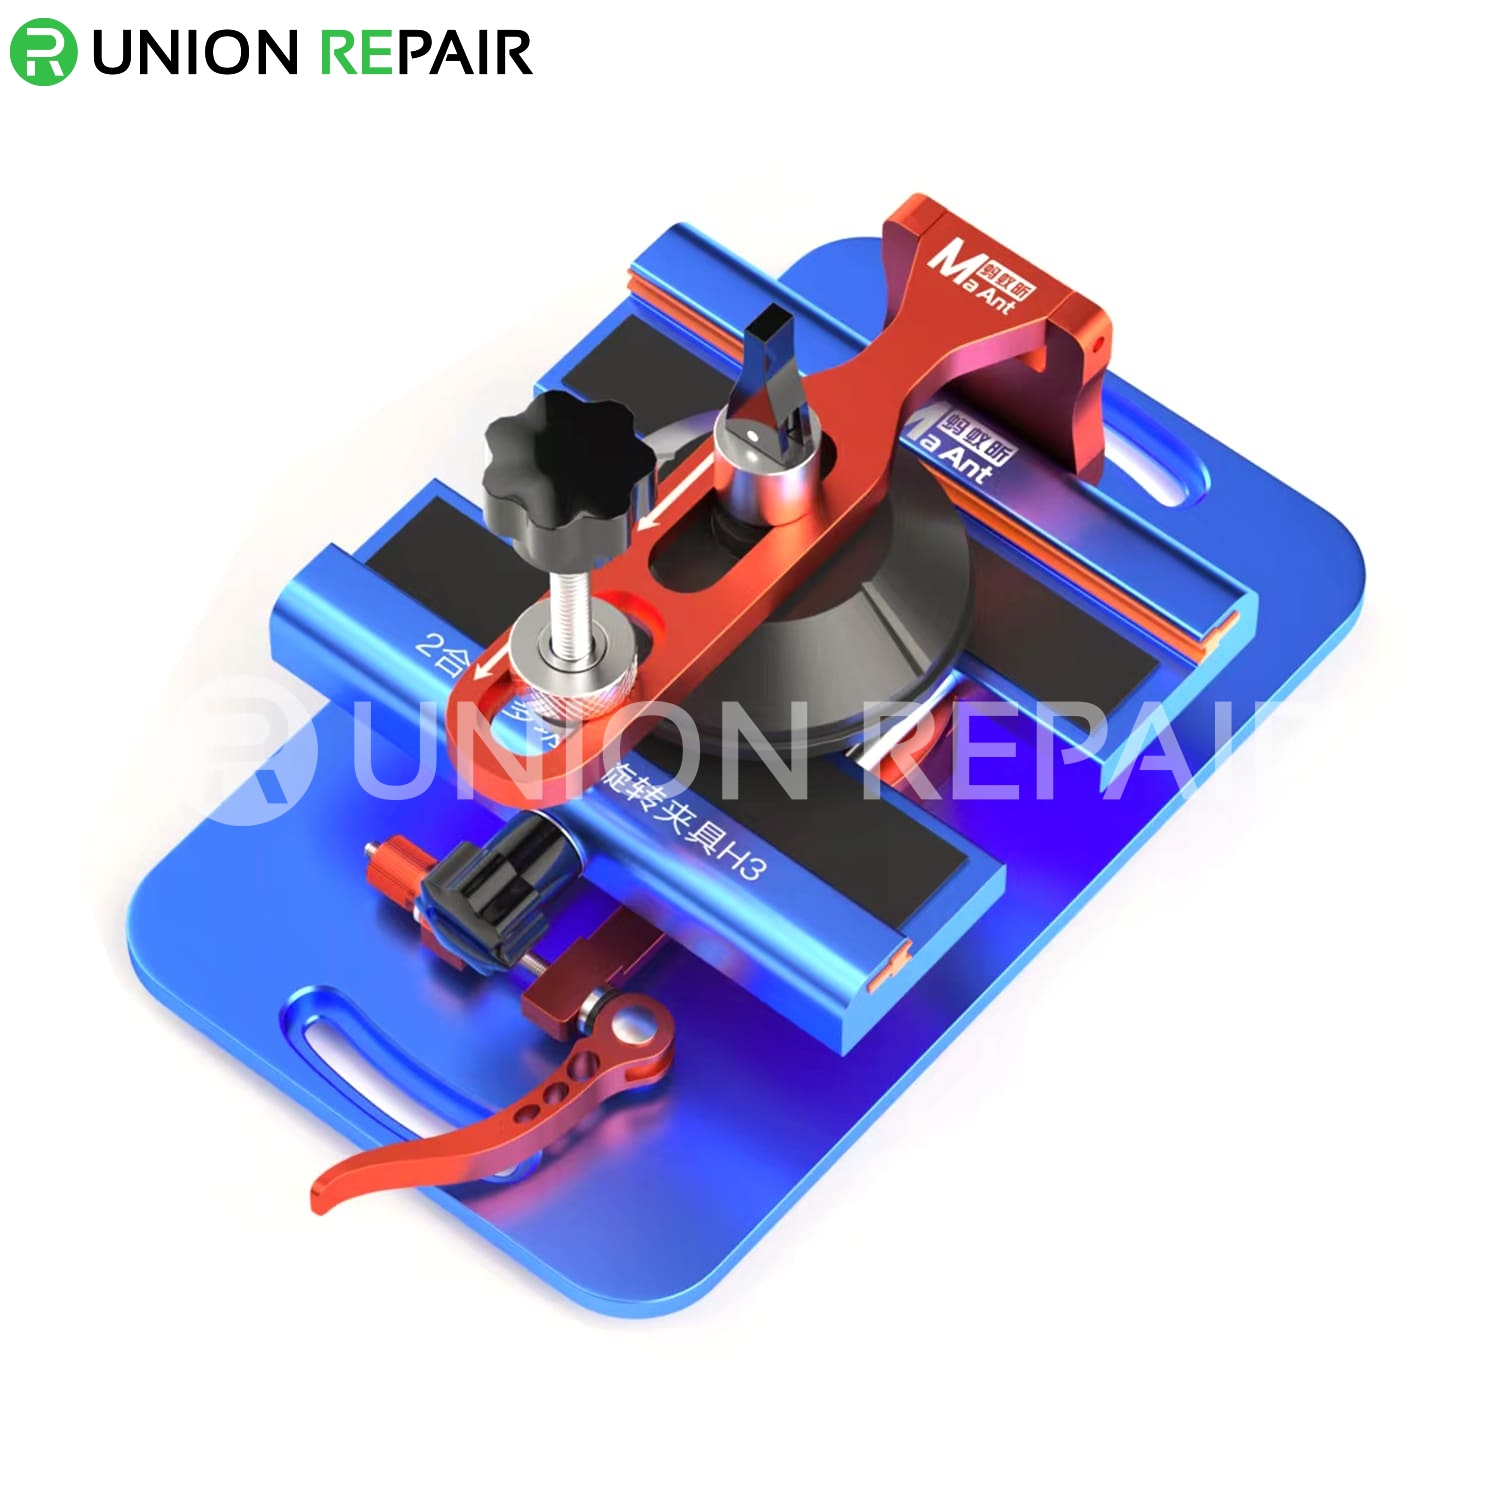 MaAnt H3 Multifunctional Rotary PCB Holder